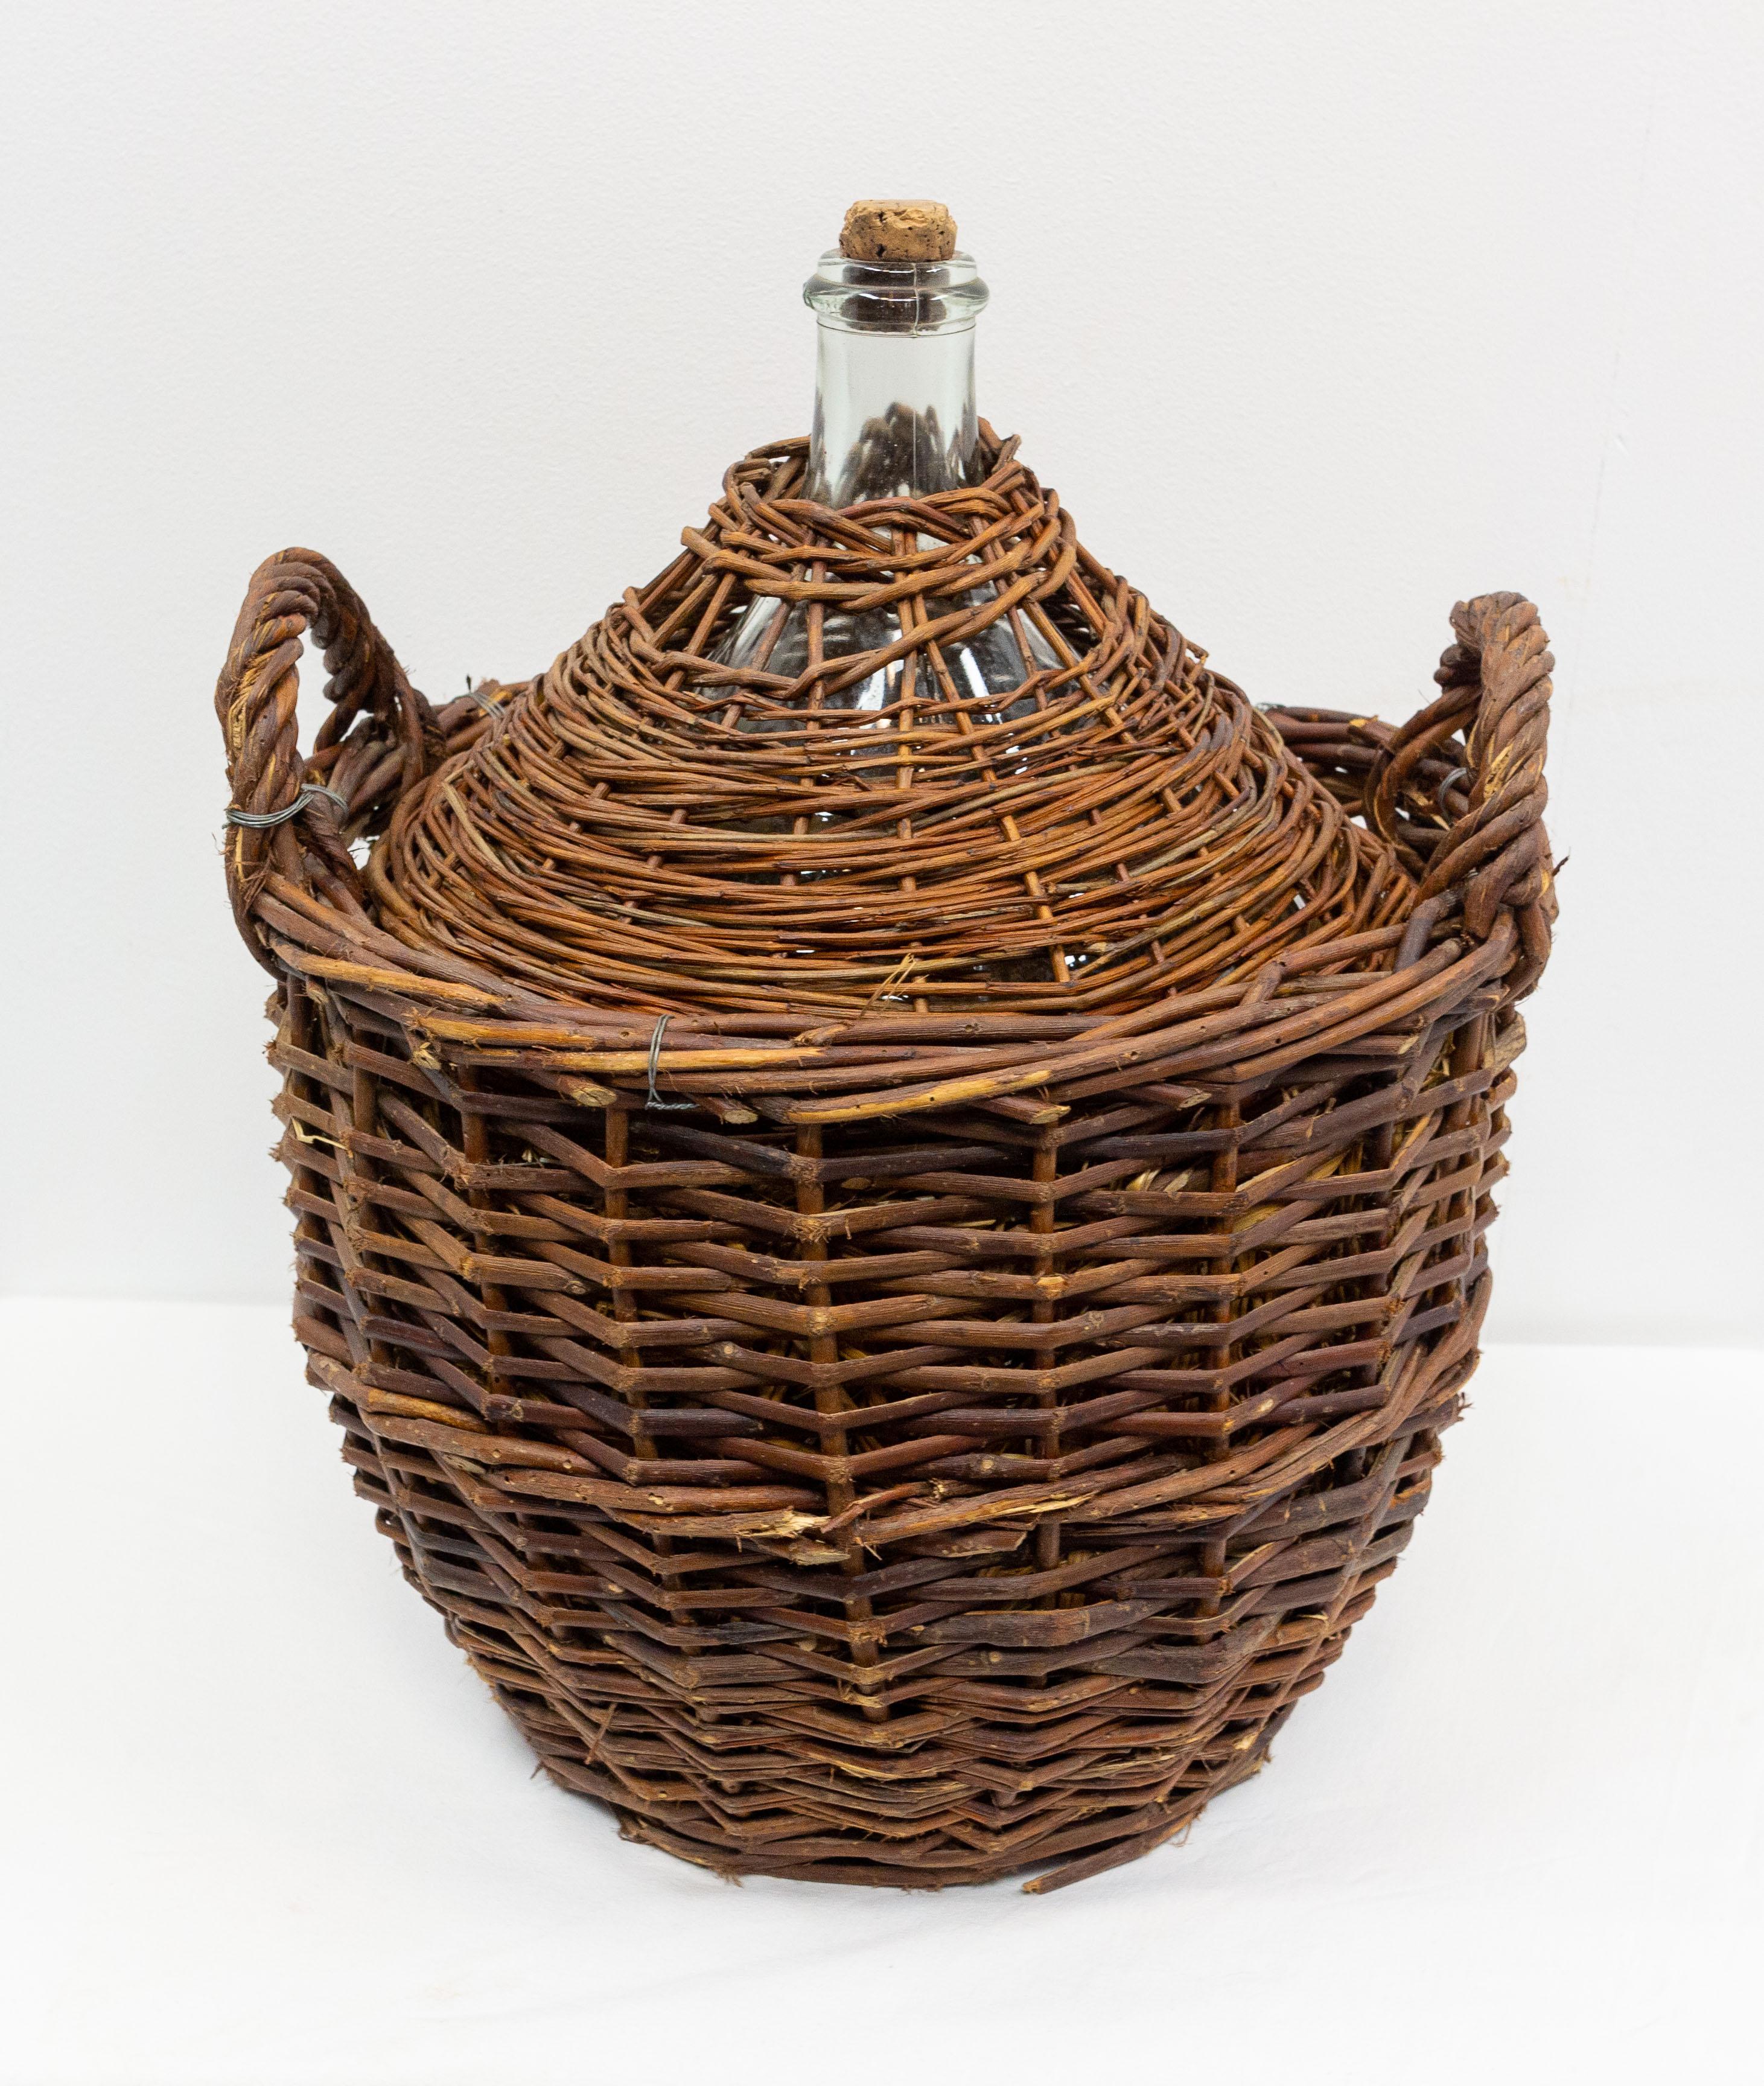 Dame Jeanne or carboy antique glass bottle demijohn.
The carboys were often protected from shocks and temperature variations into a wicker basket. Between the bascket and the bottle, some straw was added.
This king of dame jeanne is rare because